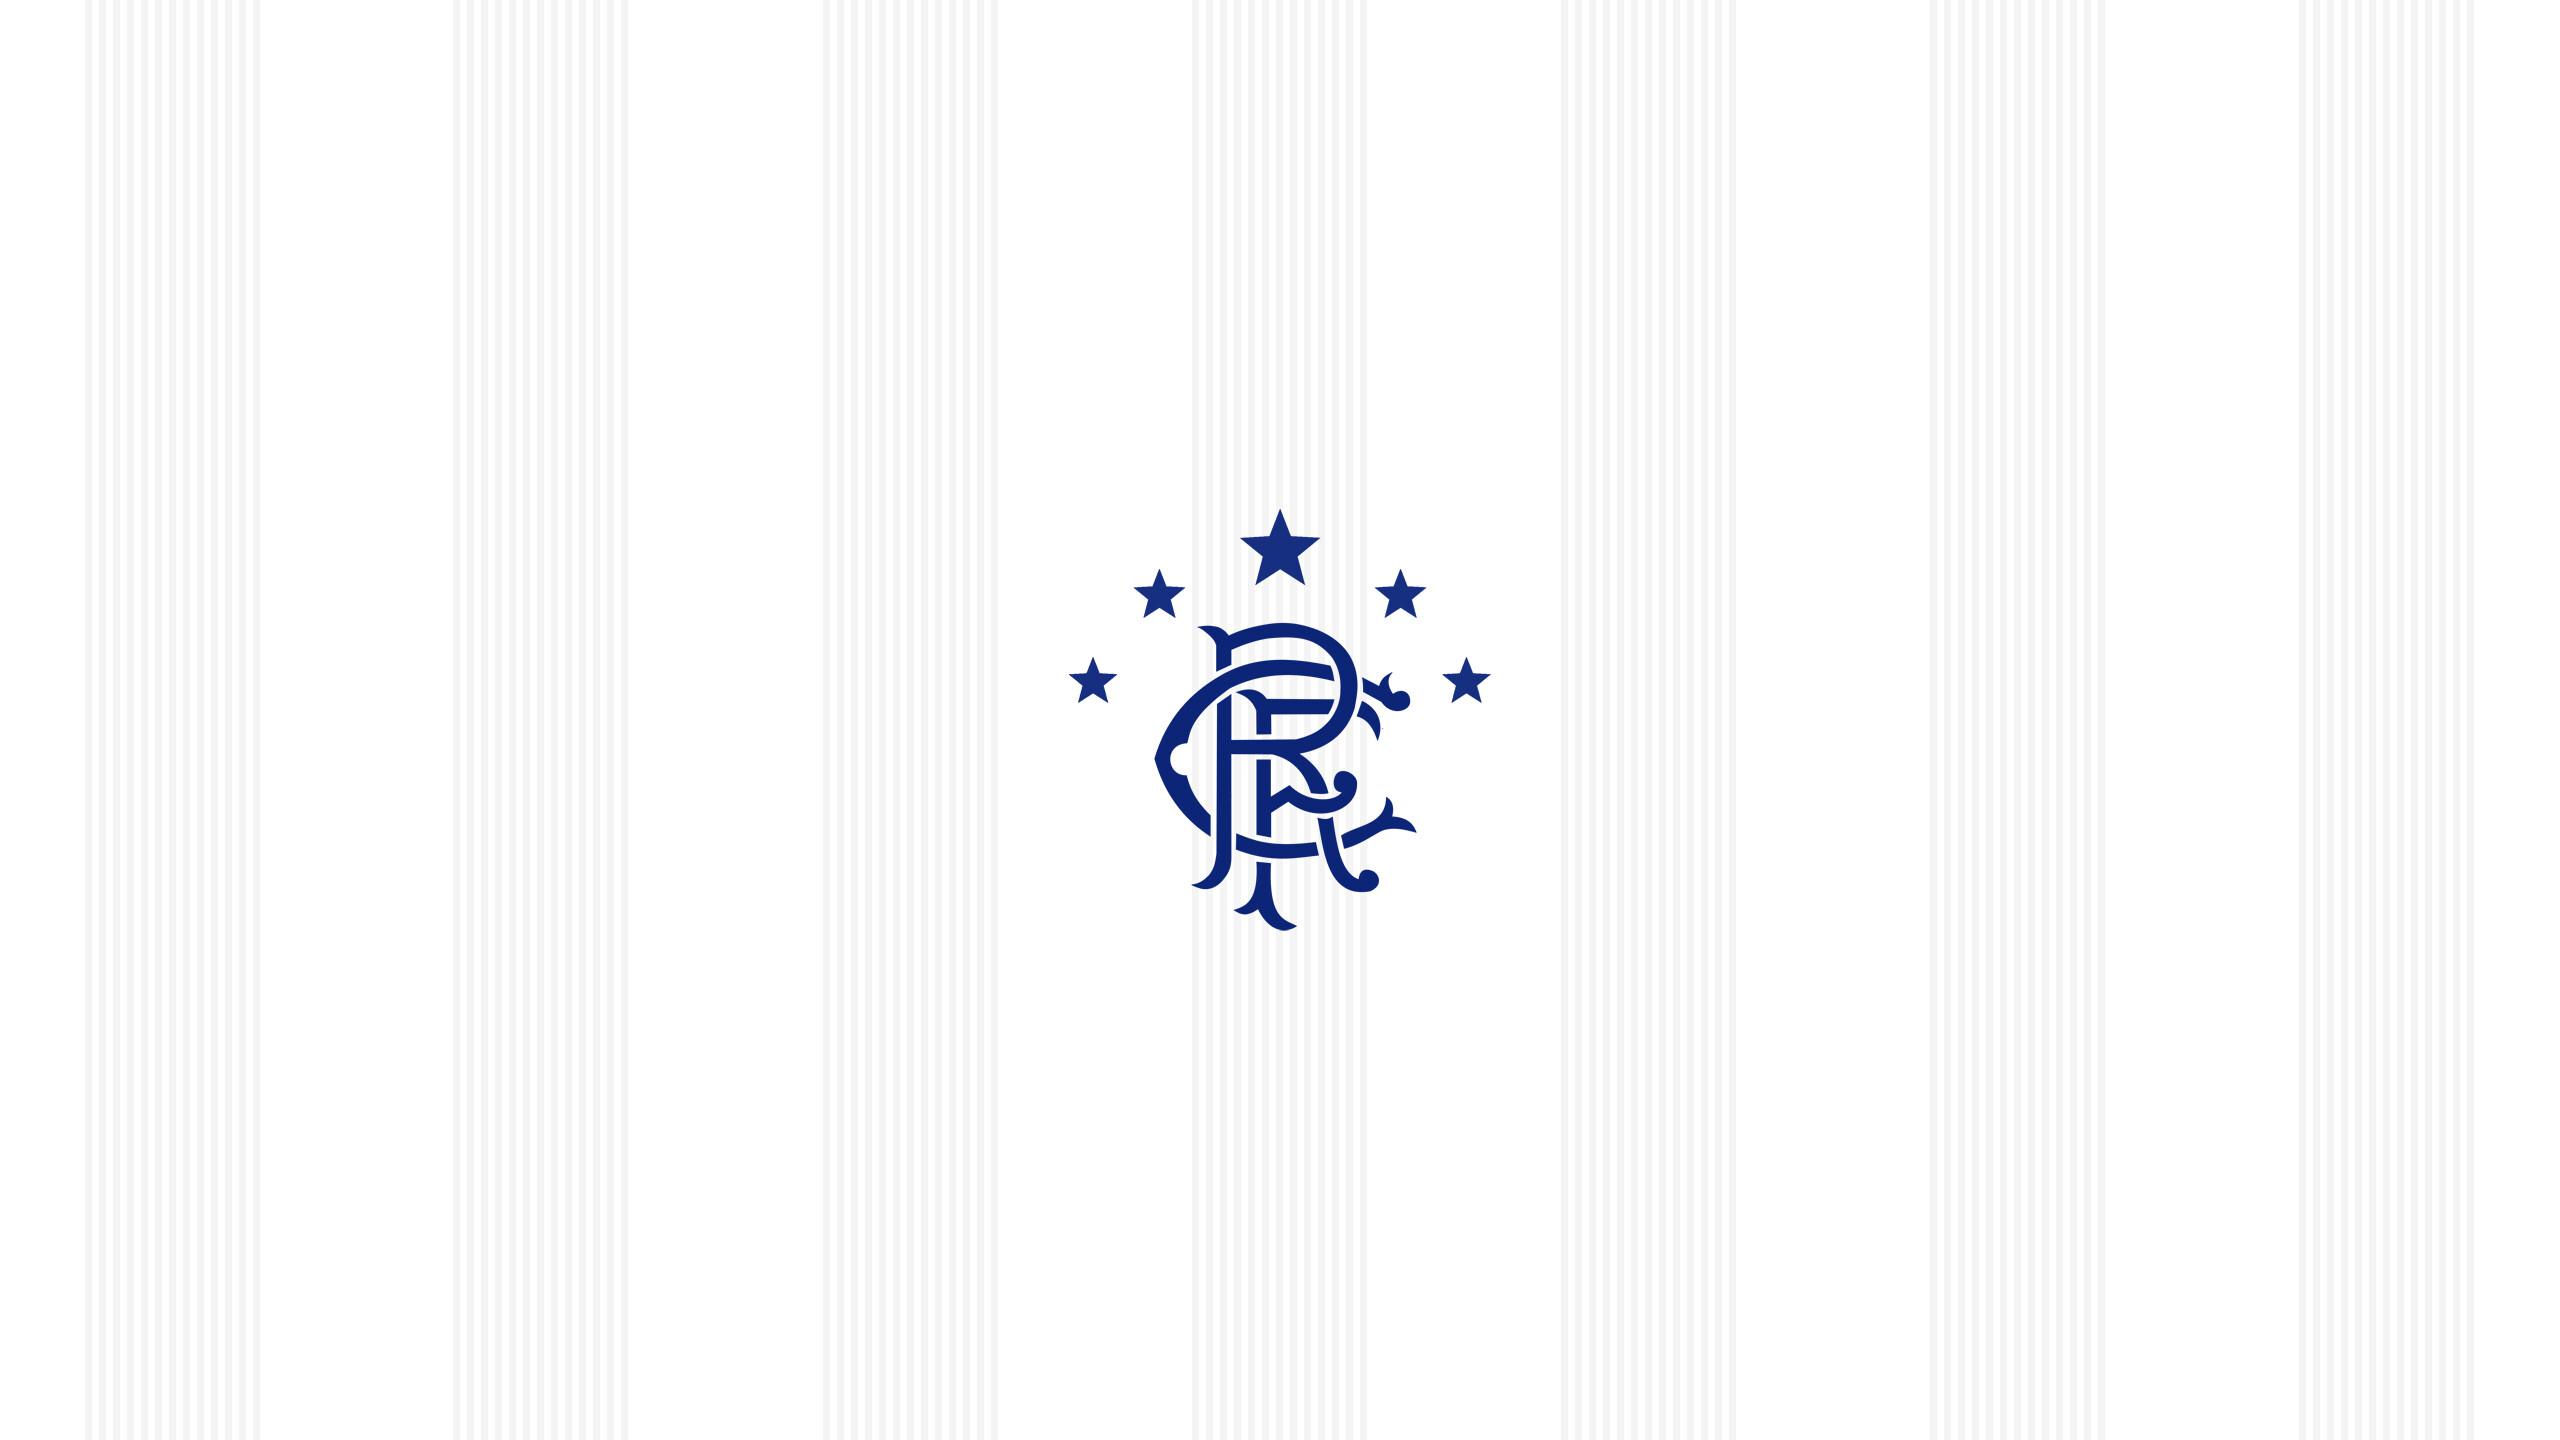 Rangers F.C.: The first club in the world to win more than fifty national league titles. 2560x1440 HD Wallpaper.